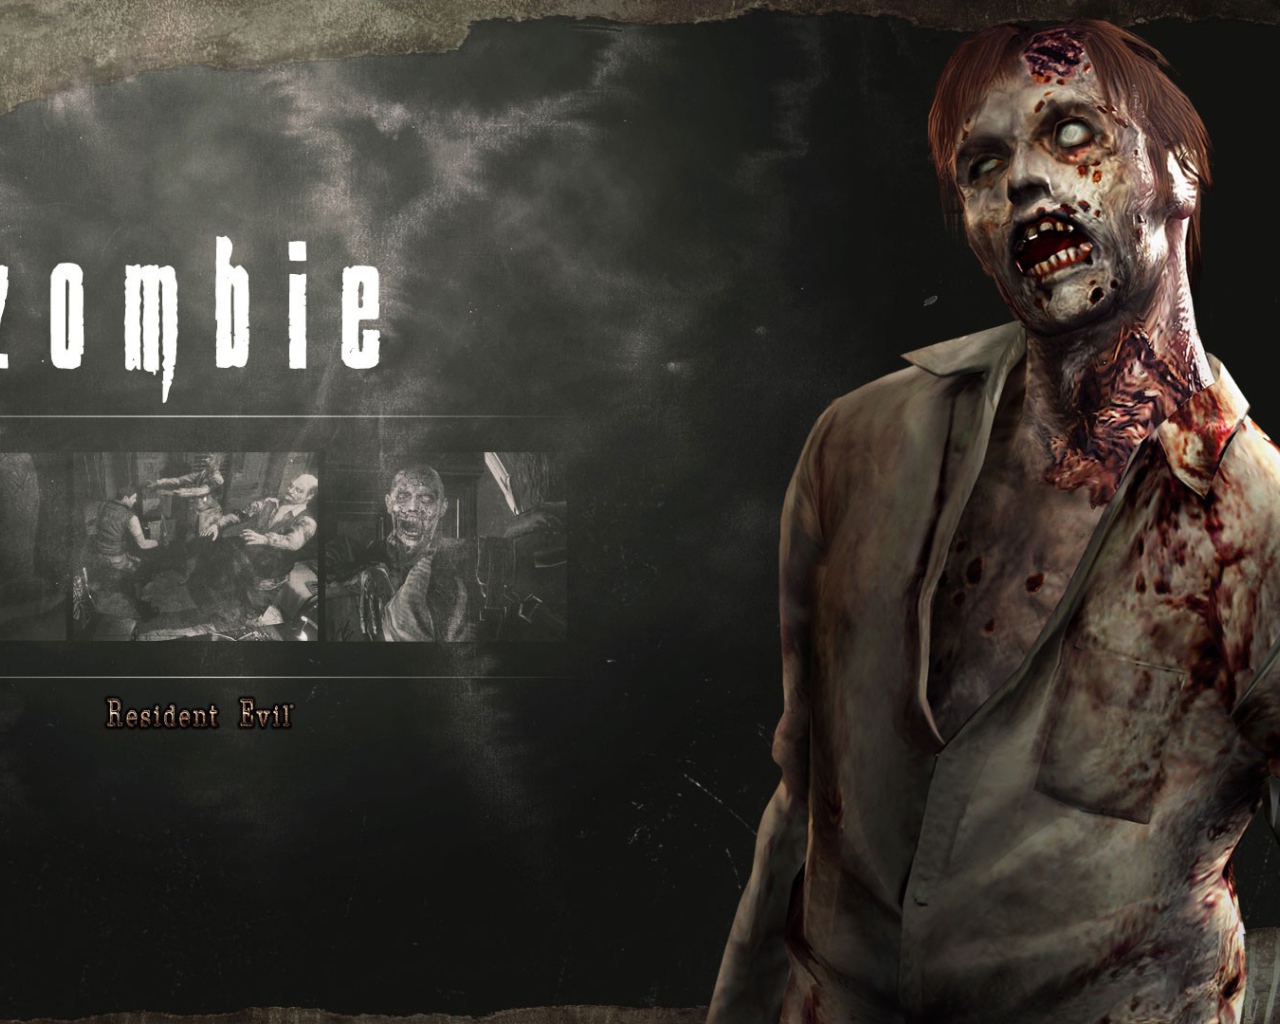 Zombies of the game Resident Evil HD Remaster